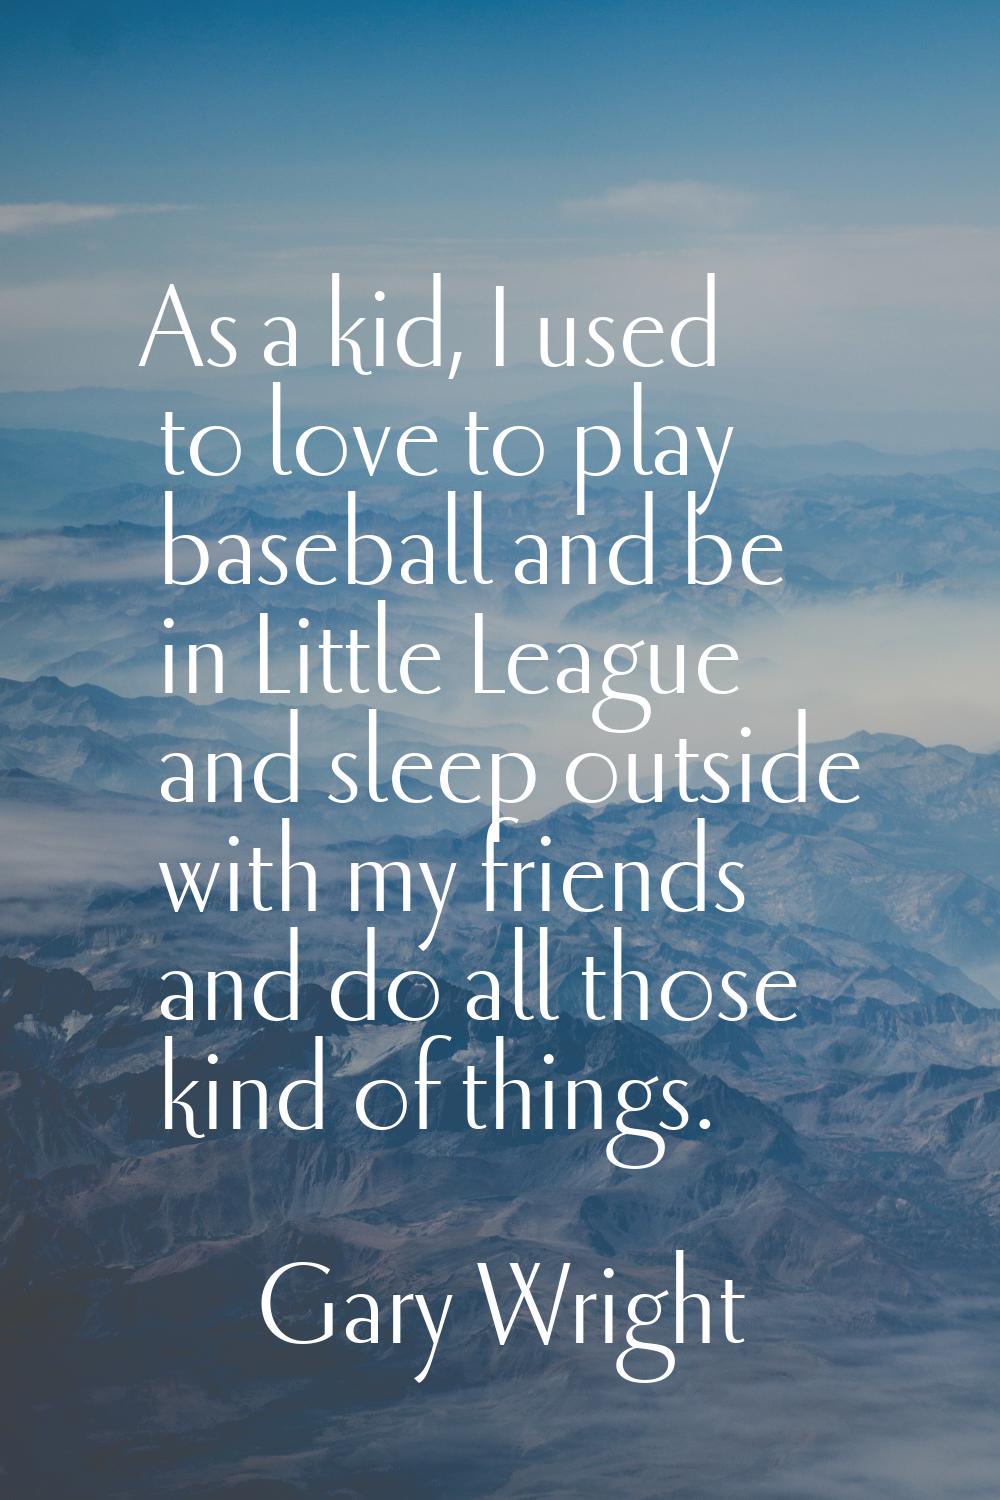 As a kid, I used to love to play baseball and be in Little League and sleep outside with my friends